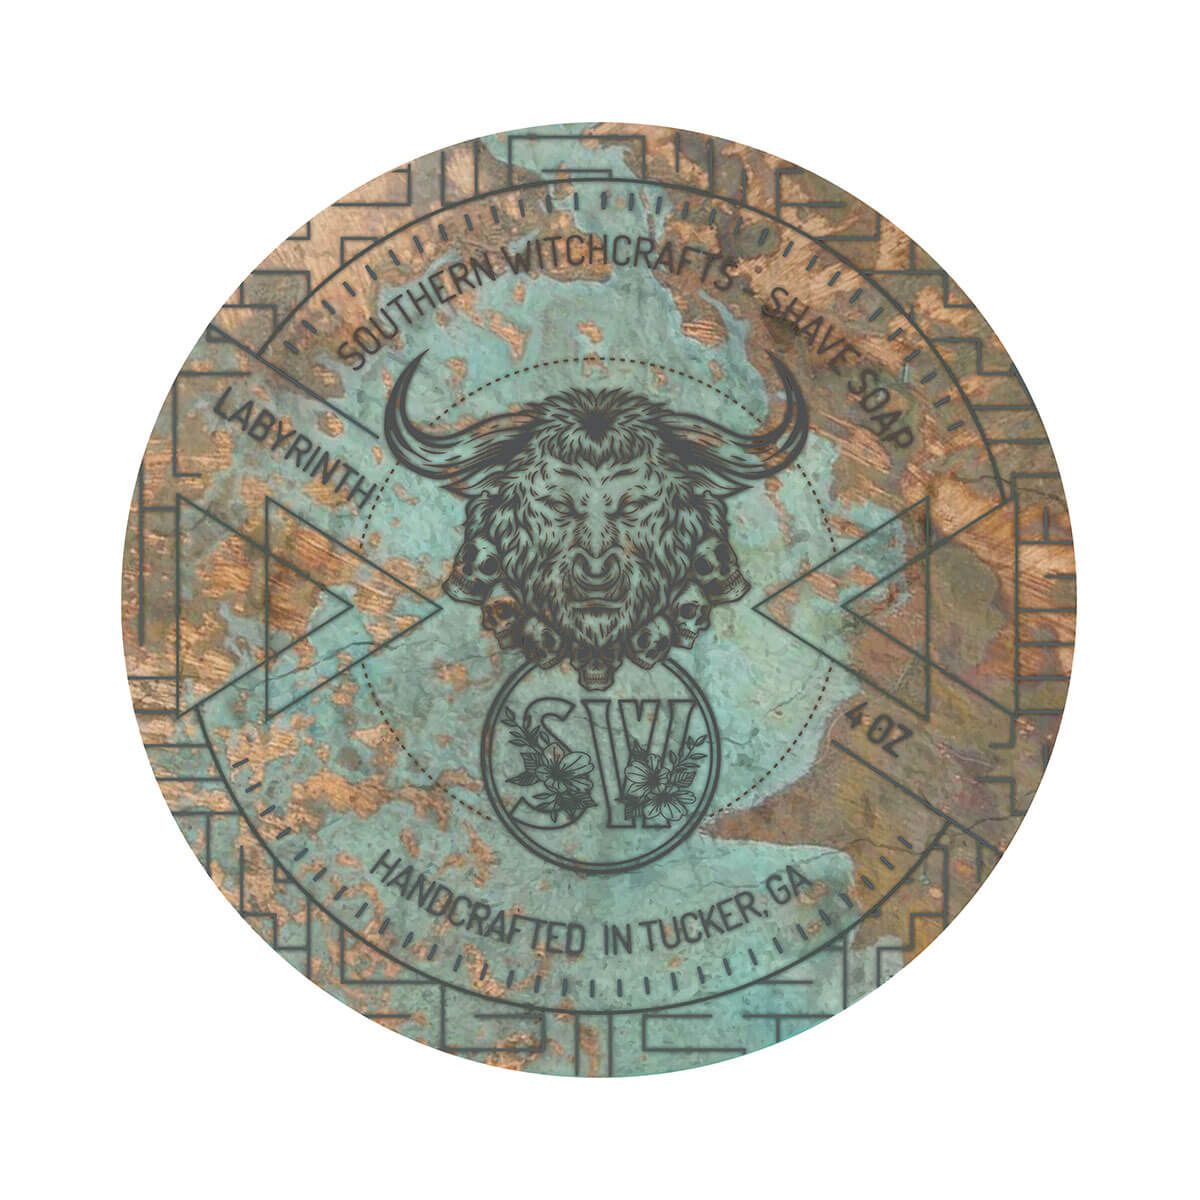 Southern Witchcrafts Labyrinth Shaving Soap